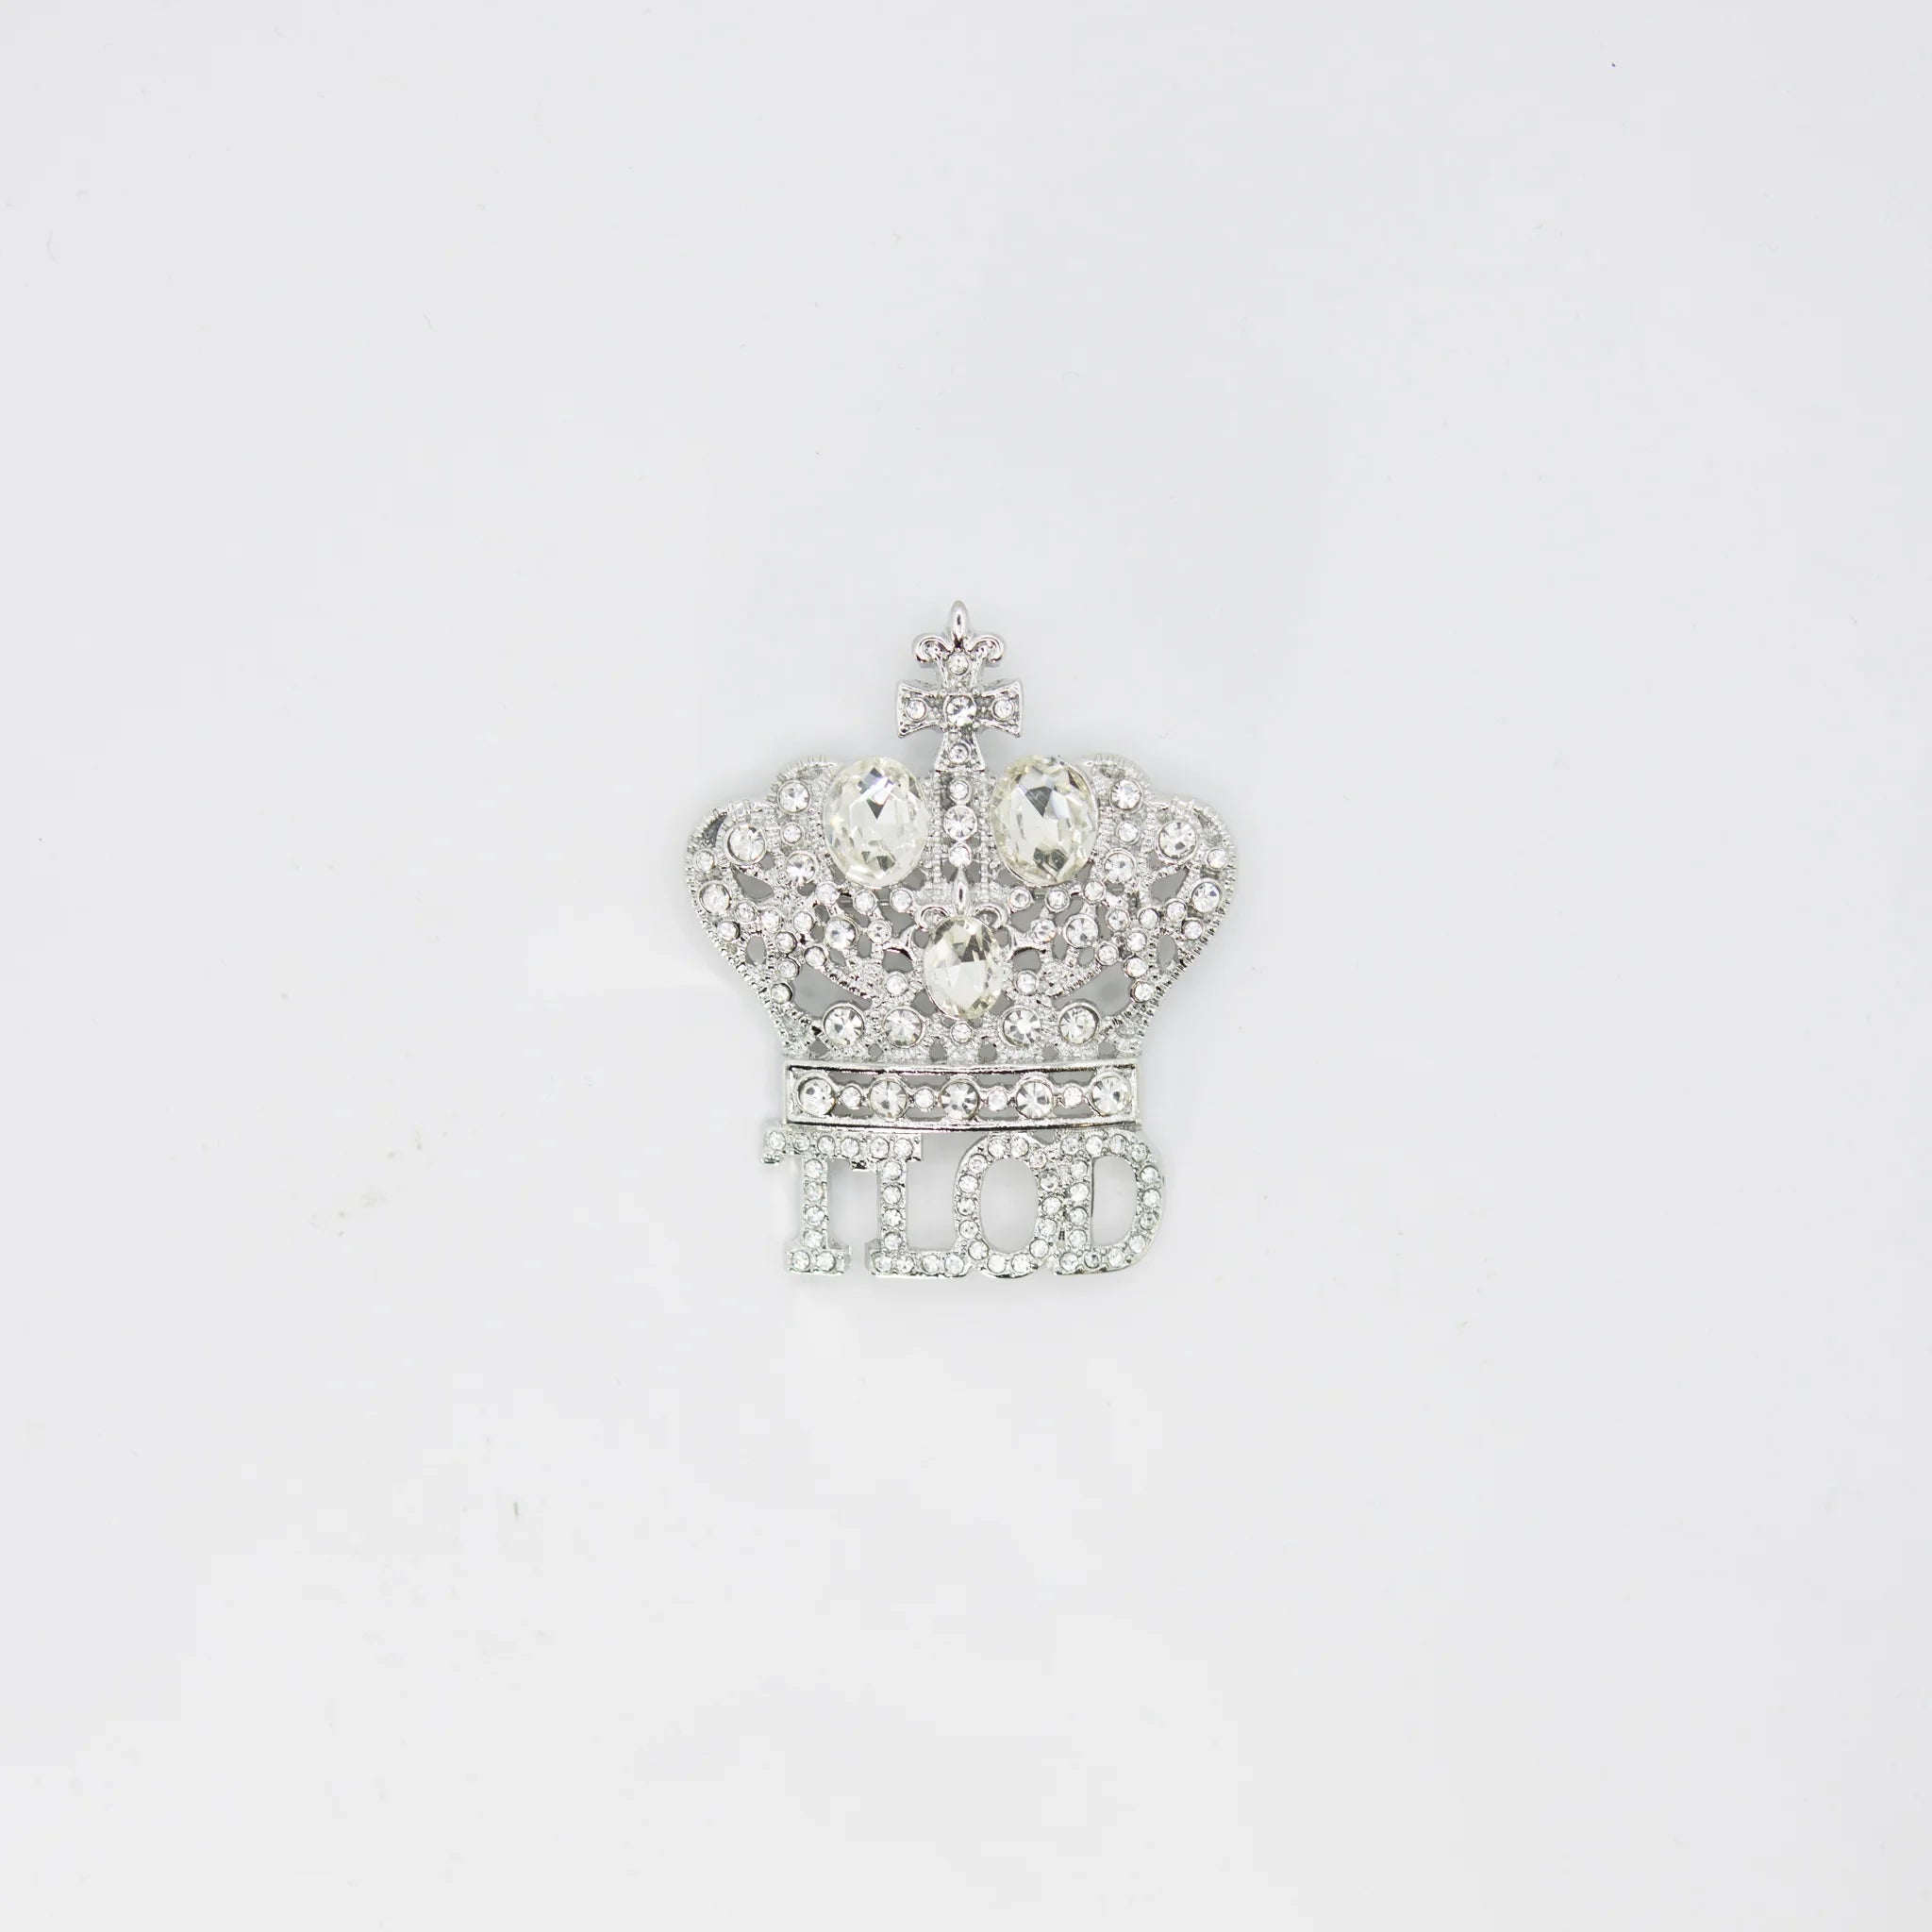 TLOD Silver Crown Pin - Diva Starr Boutique